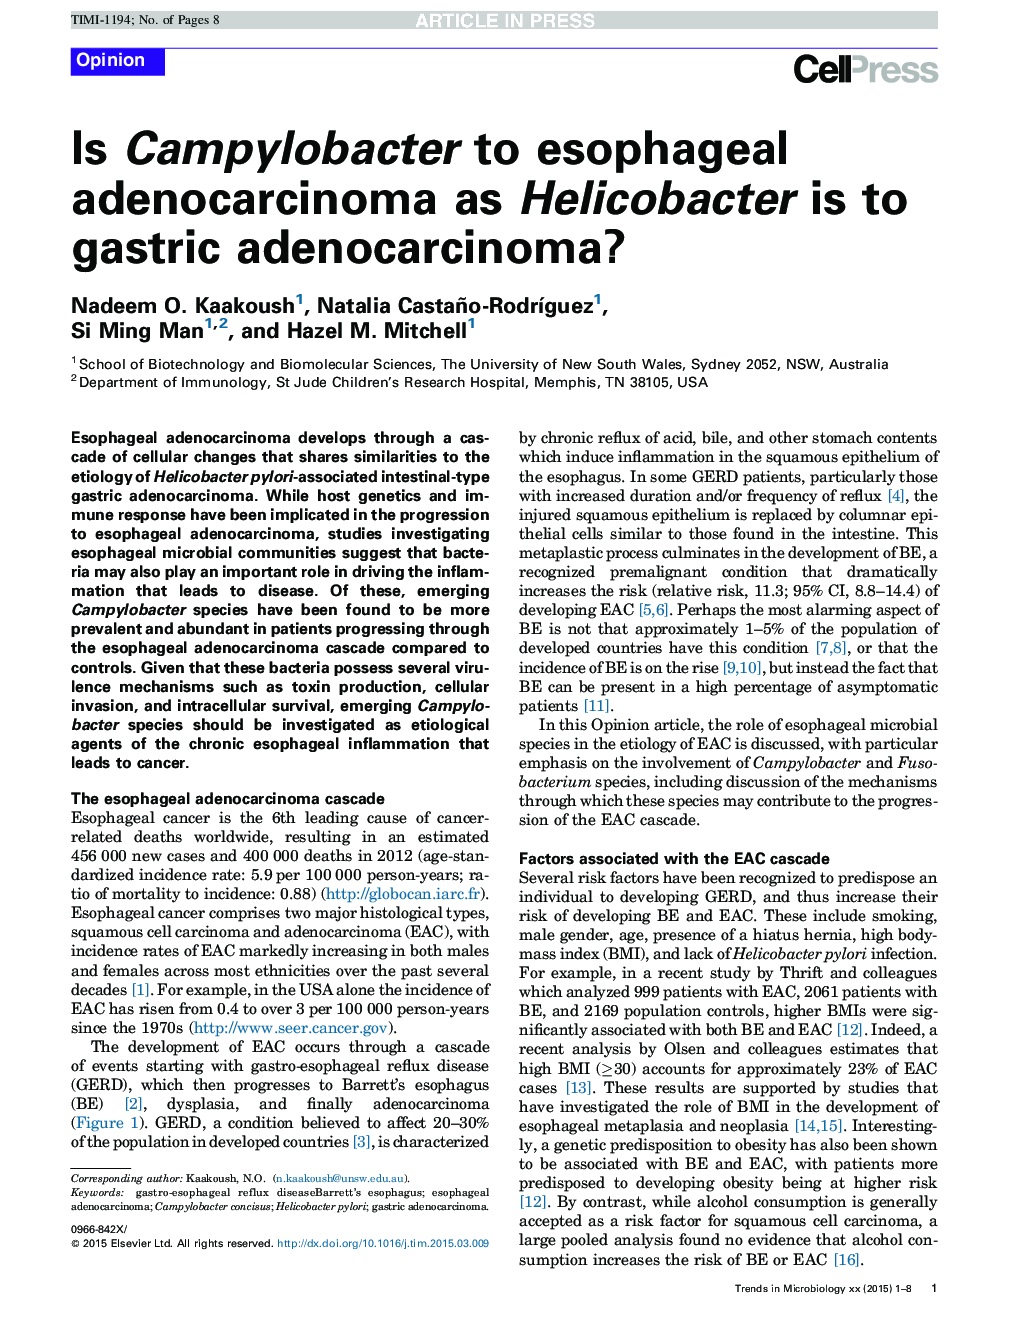 Is Campylobacter to esophageal adenocarcinoma as Helicobacter is to gastric adenocarcinoma?